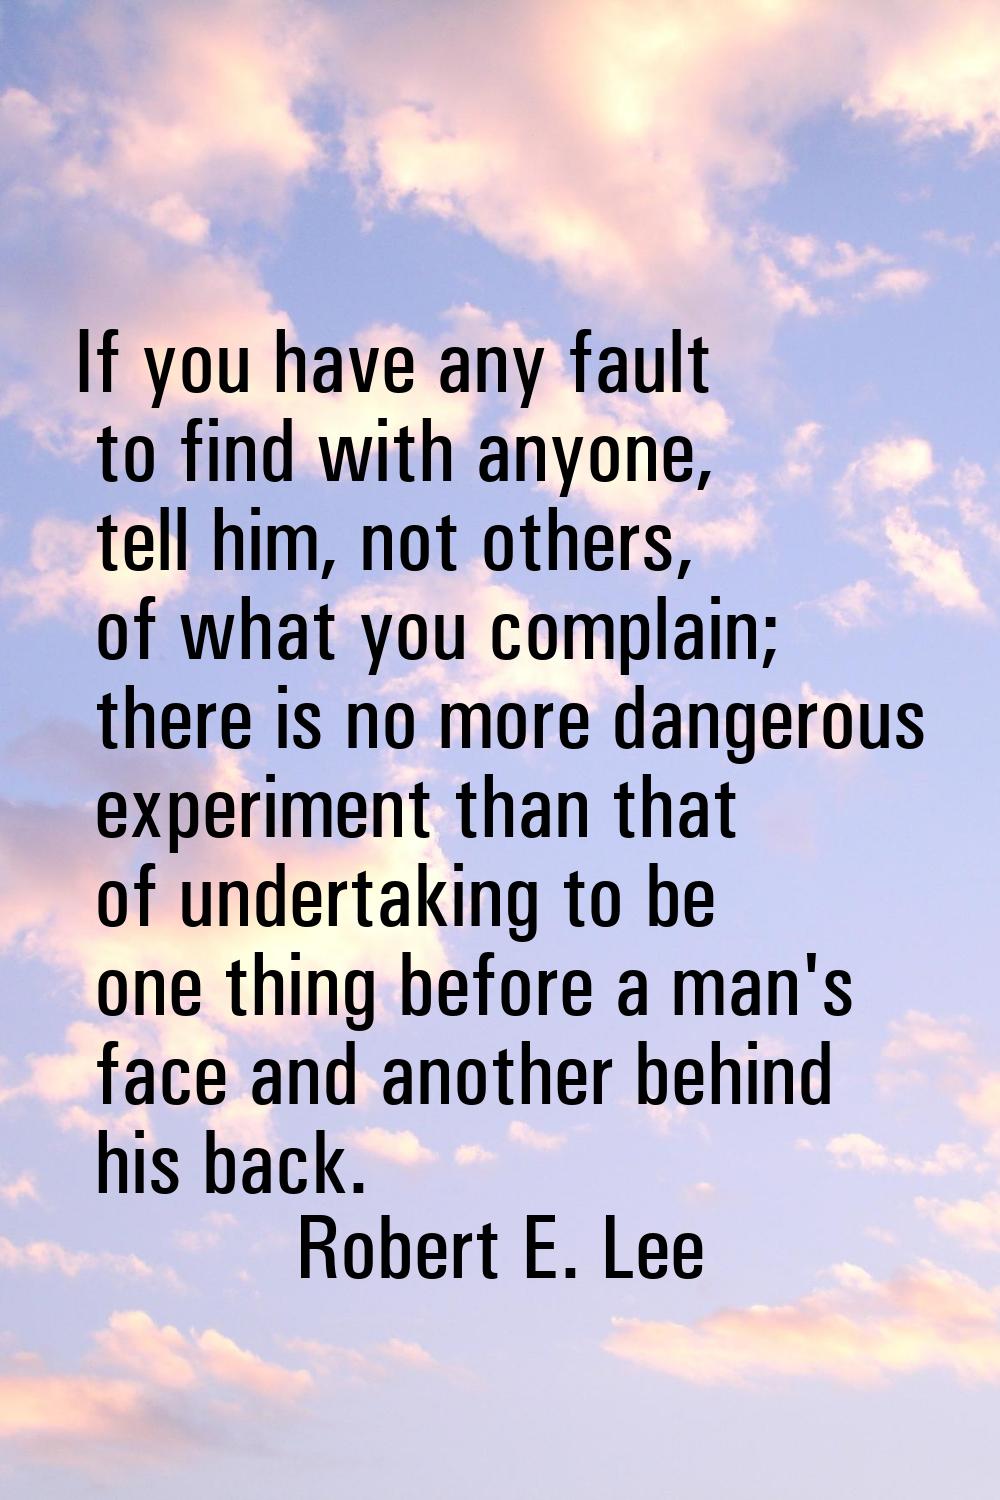 If you have any fault to find with anyone, tell him, not others, of what you complain; there is no 